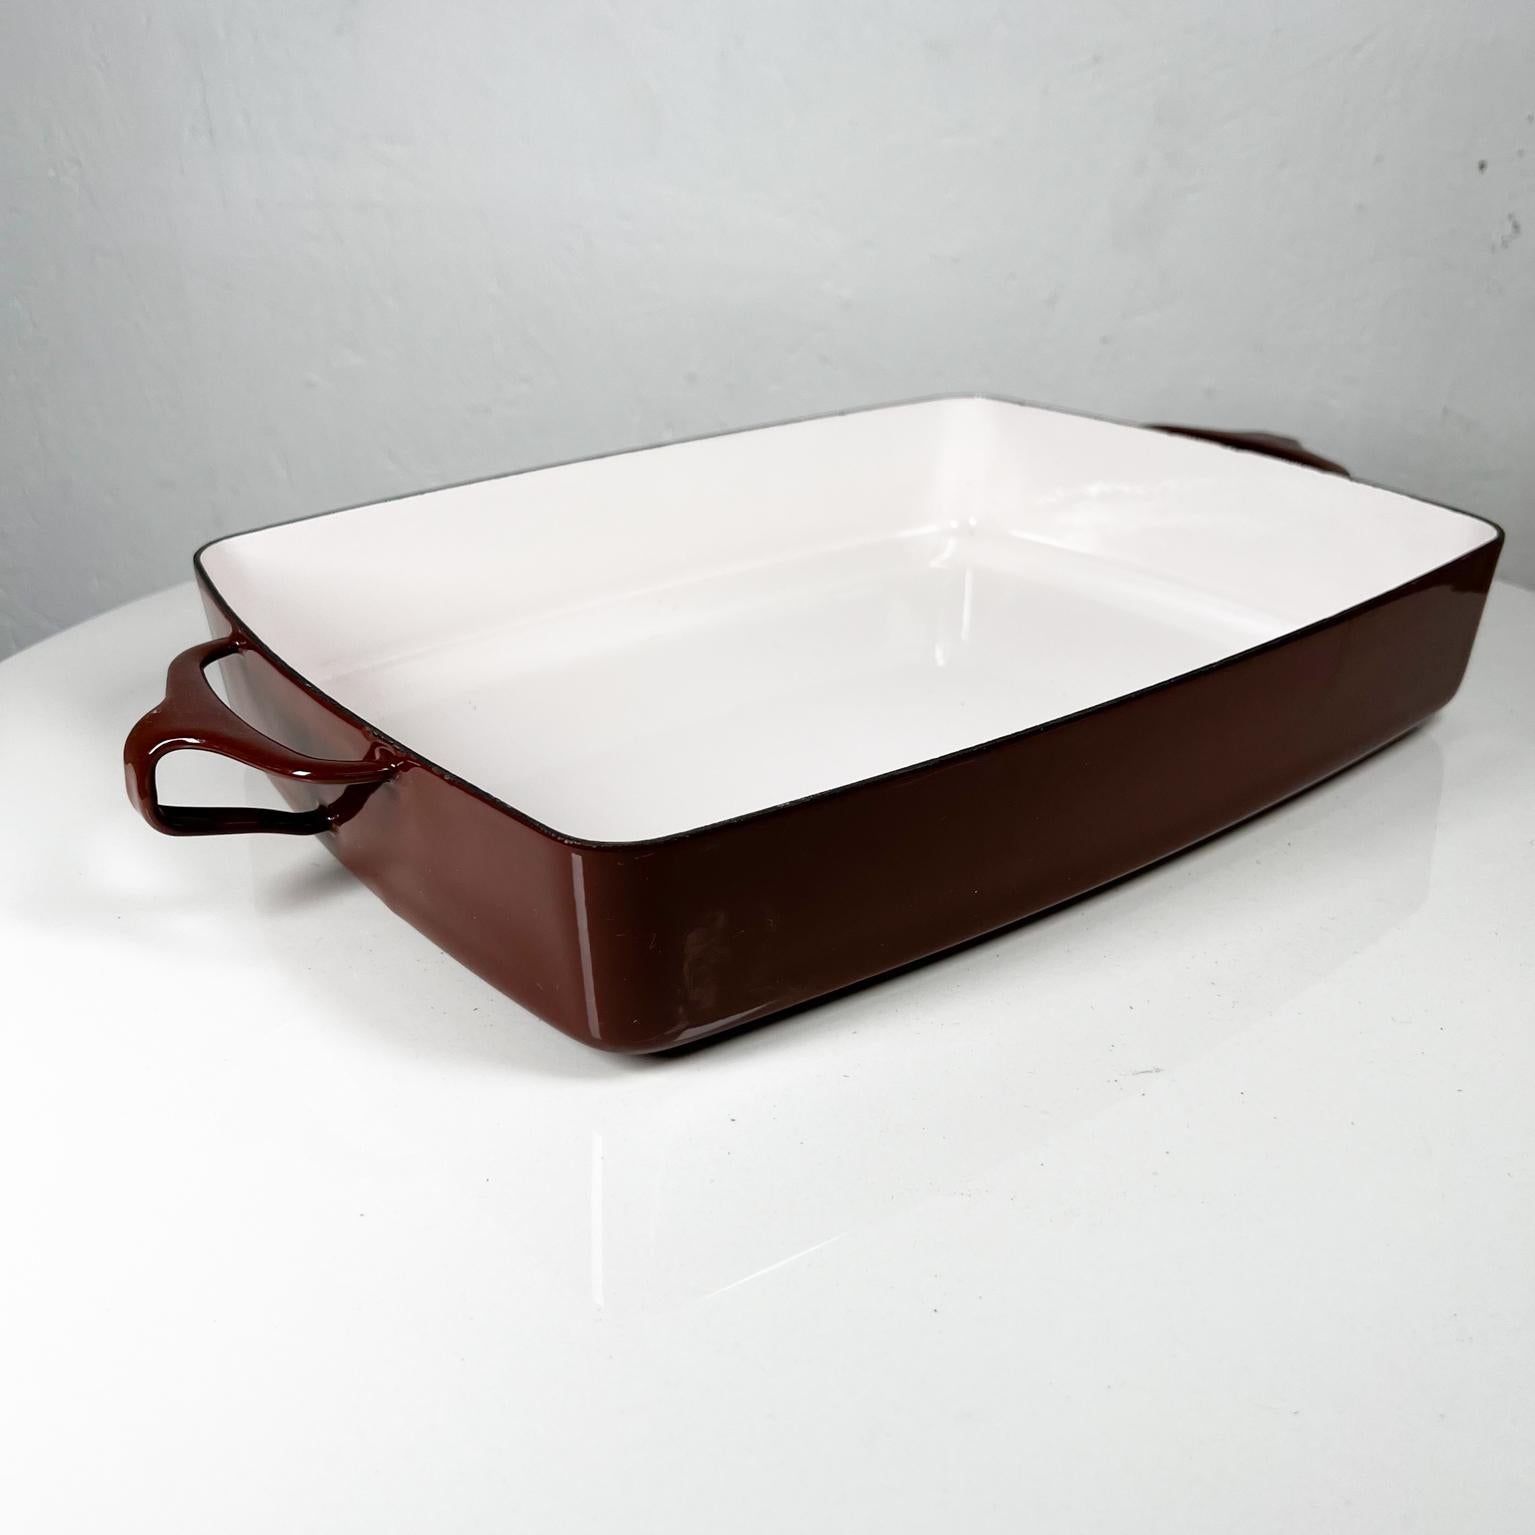 1950s Dansk Designs Jens Quistgaard large brown Enamel Casserole Paella bake pan
9.75 d x 16.13 w x 2.13 tall
Kobenstyle Made in France. Stamped.
Clean. Few nicks around the edges (upper lip of casserole)
Preowned vintage condition.
See images